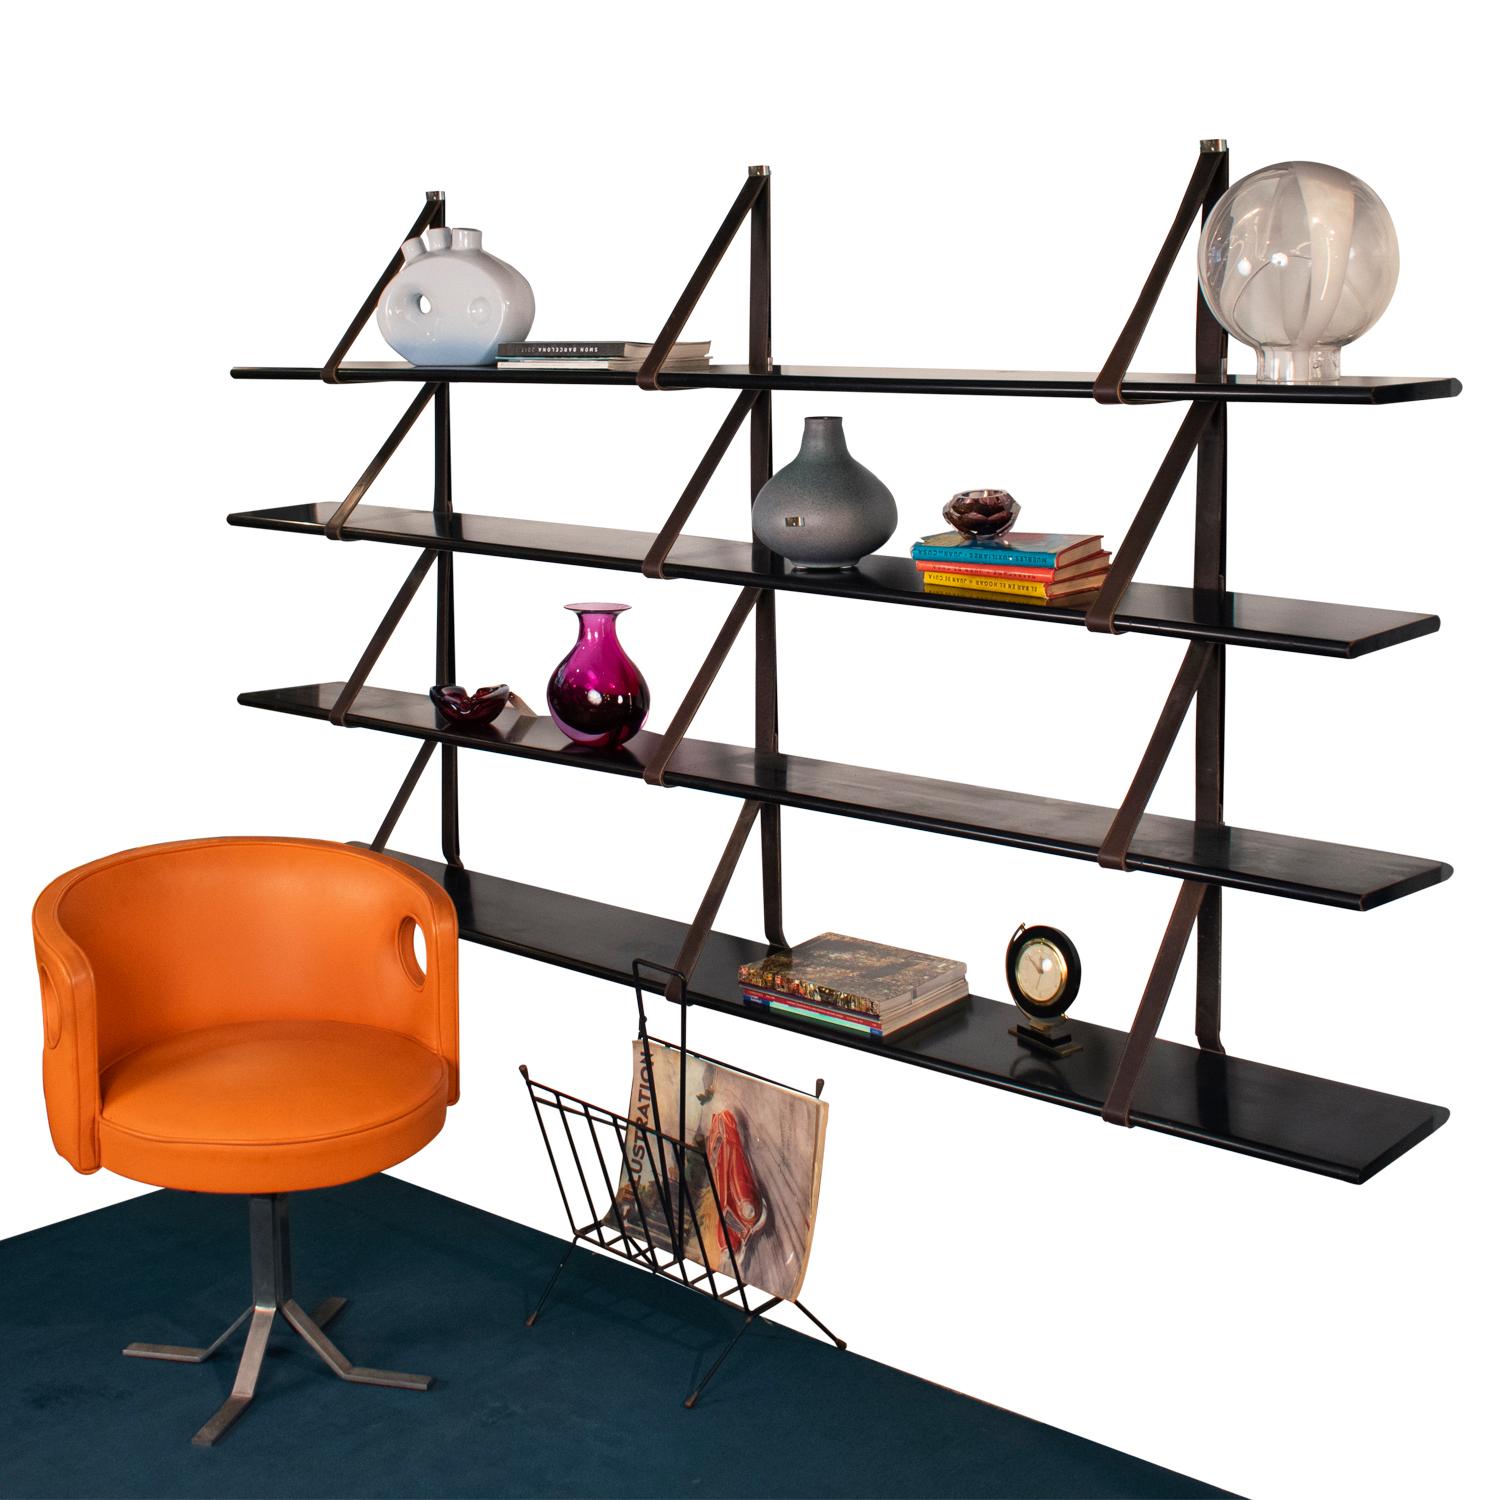 MM wall-mounted bookshelf designed by Miguel Milá for Gres in 1962, Spain.
Shelves attached by leather straps. The shelves measure: 225cm in length by 25 cm. deep and 2.5 cm. thick.
Shelves are in dark wood veneer dm. The shelves are hung on the